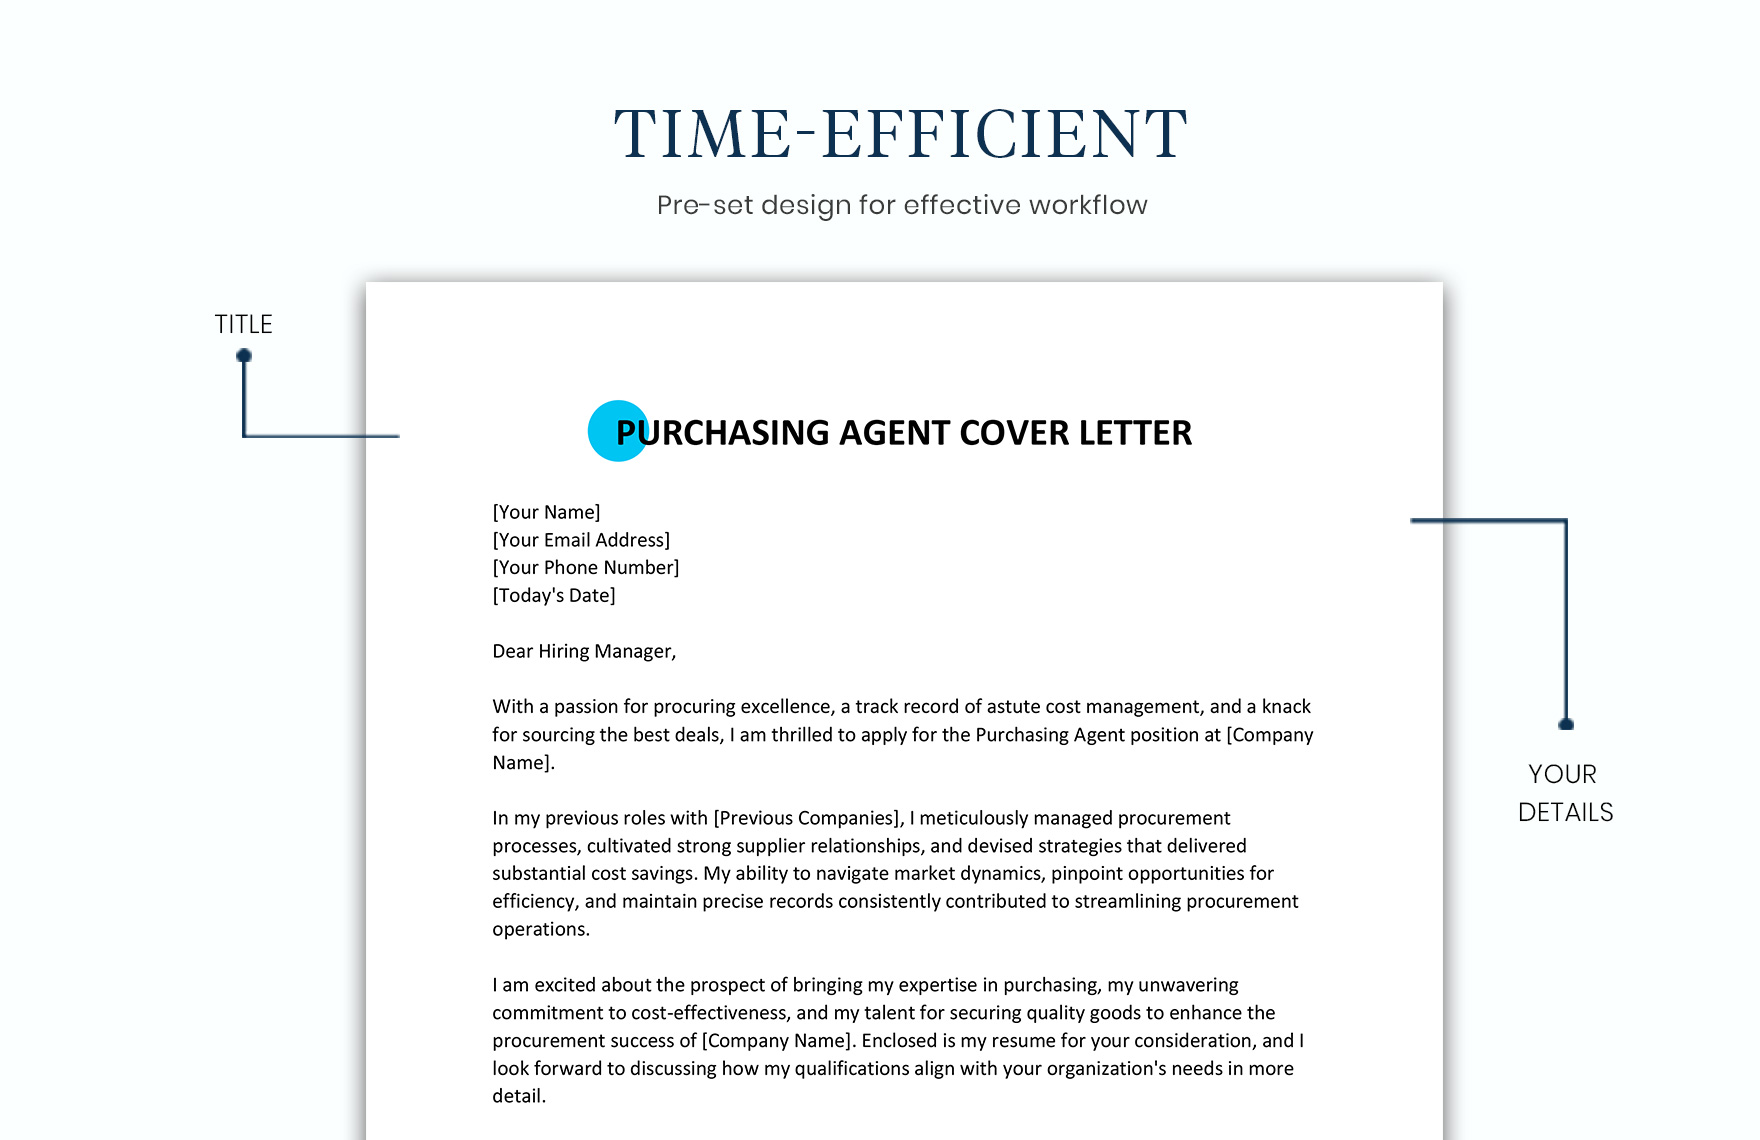 Purchasing Agent Cover Letter